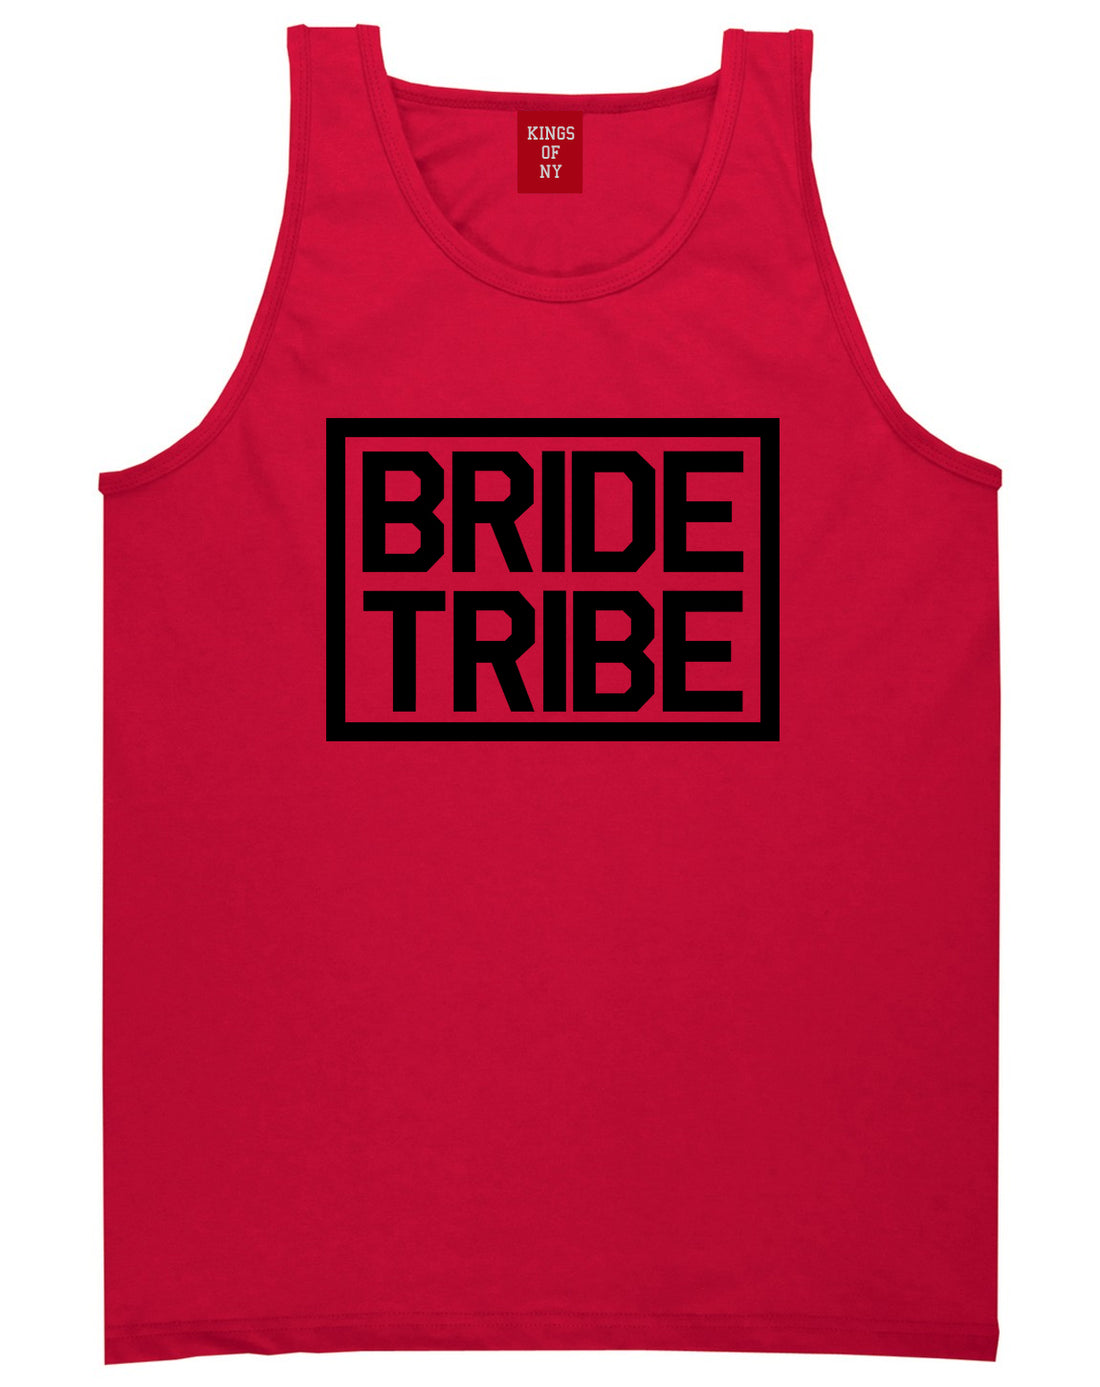 Bride Tribe Bachlorette Party Red Tank Top Shirt by Kings Of NY